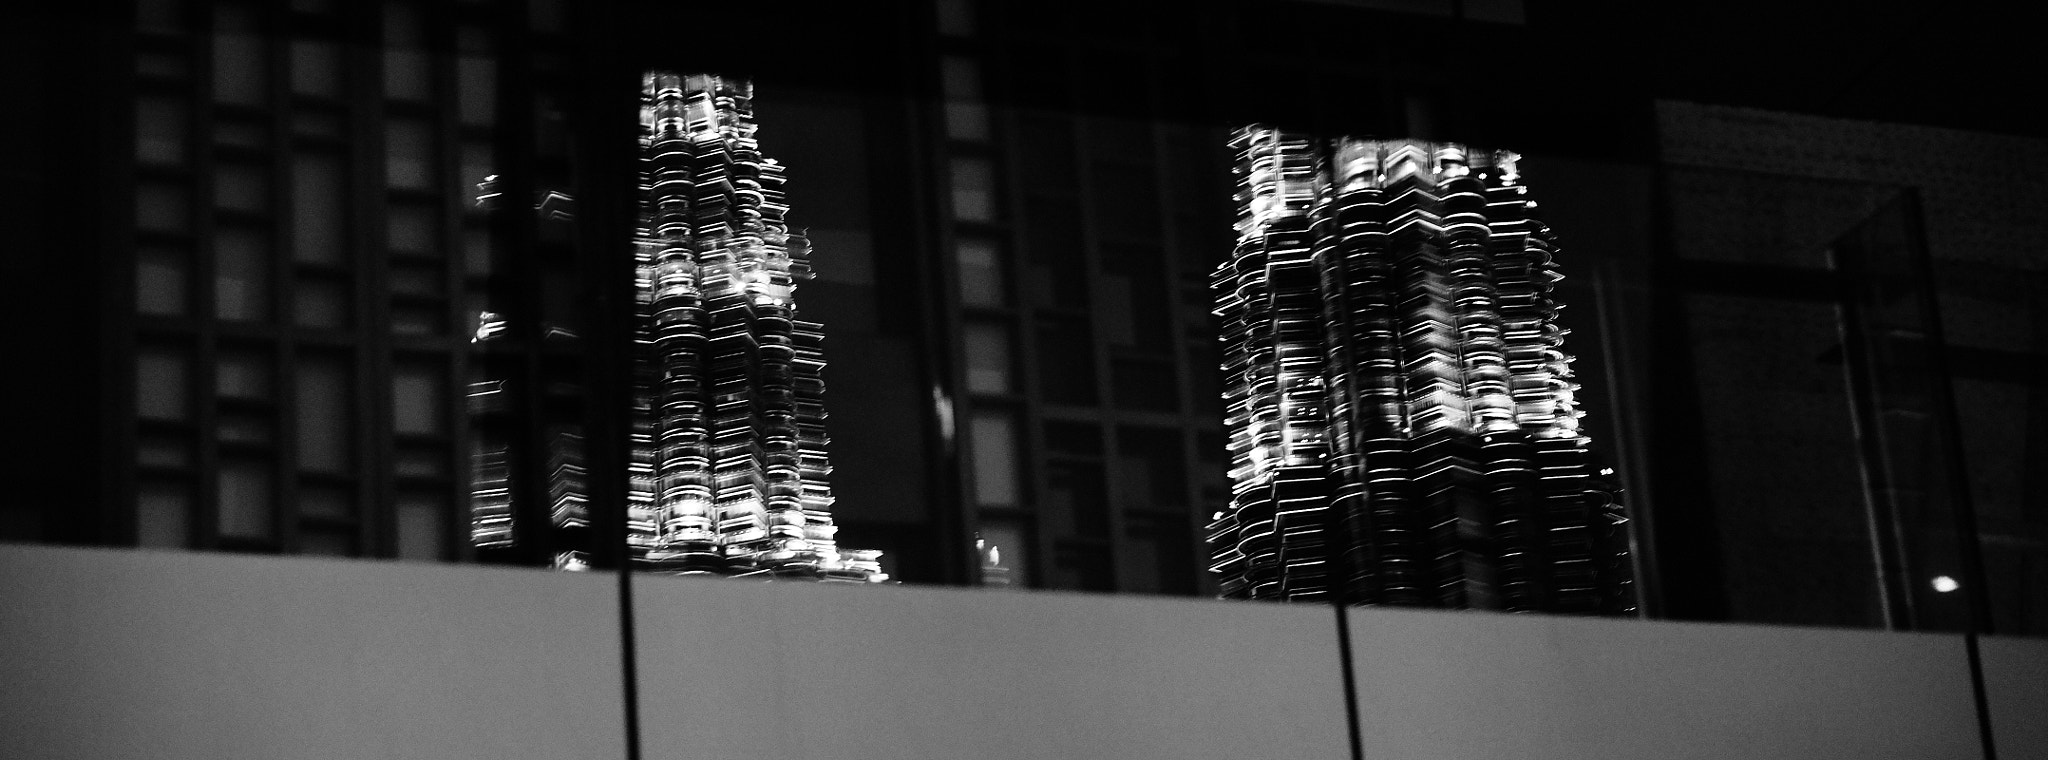 Sony a6000 sample photo. Reflection of the petronas towers on a balkony photography